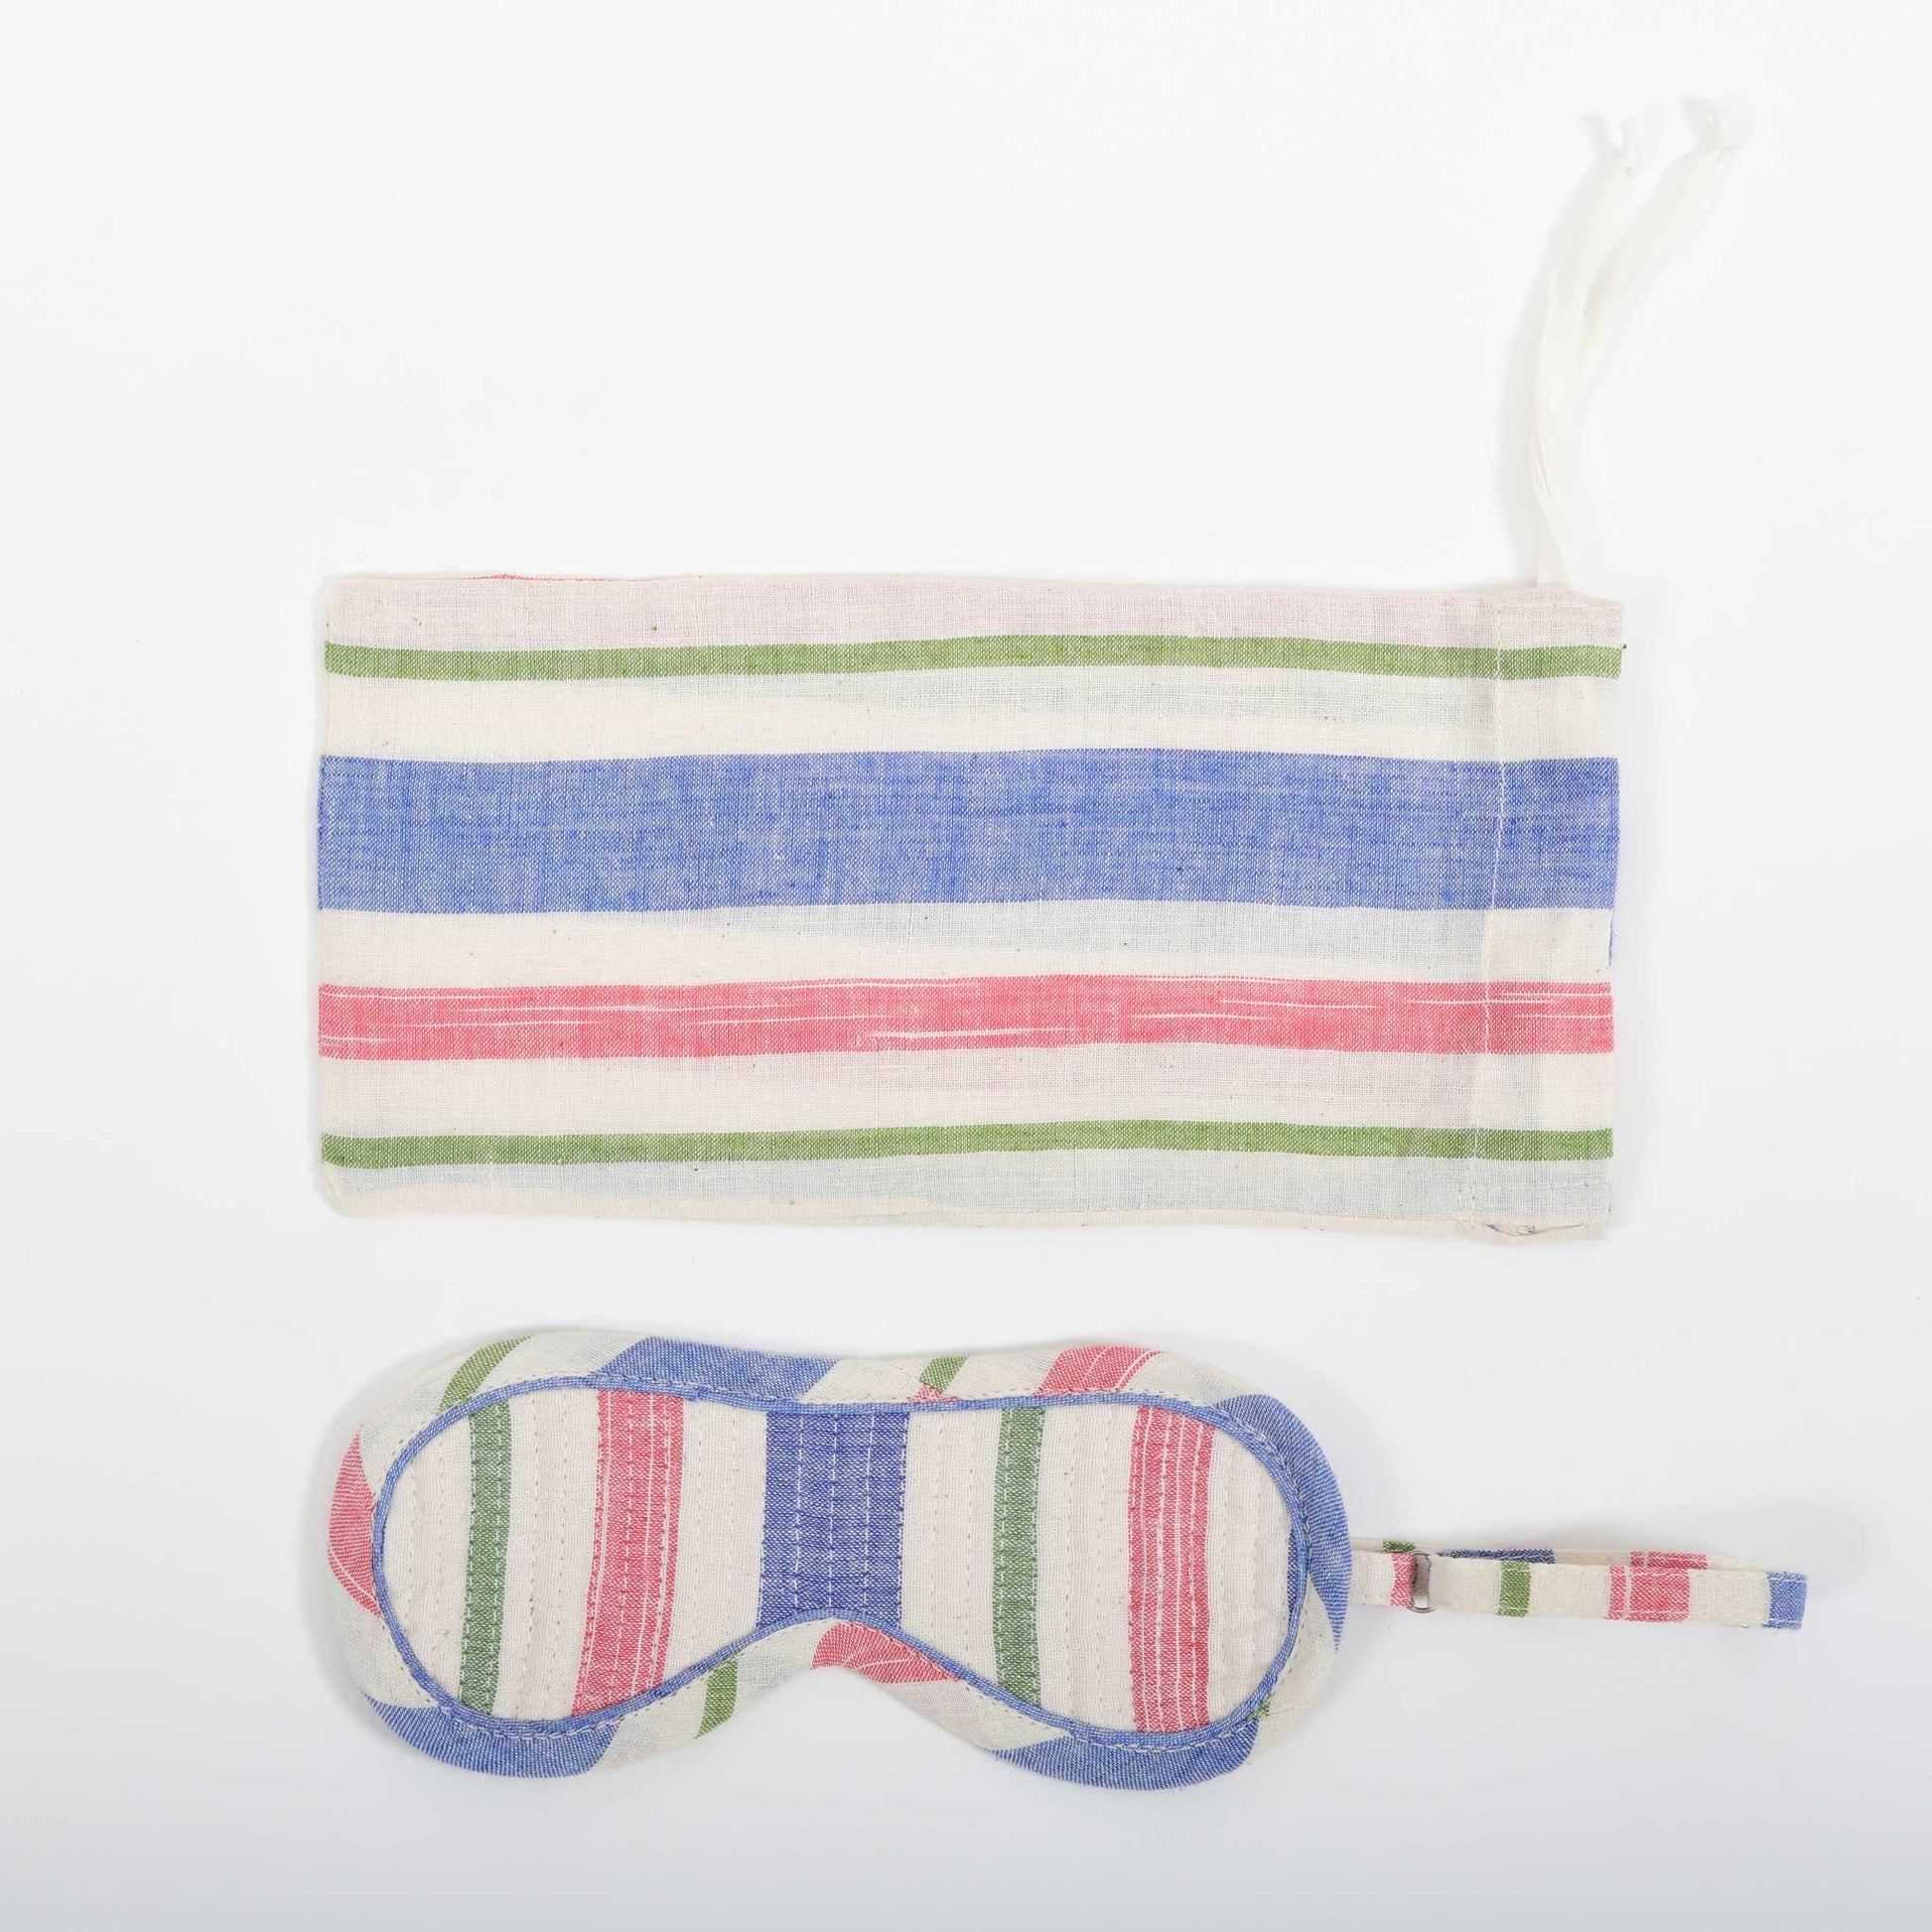 A close-up image from the top of the multi-coloured striped eye mask and it's co-ordinated cover made in handspun and handwoven khadi cotton by Cotton Rack.